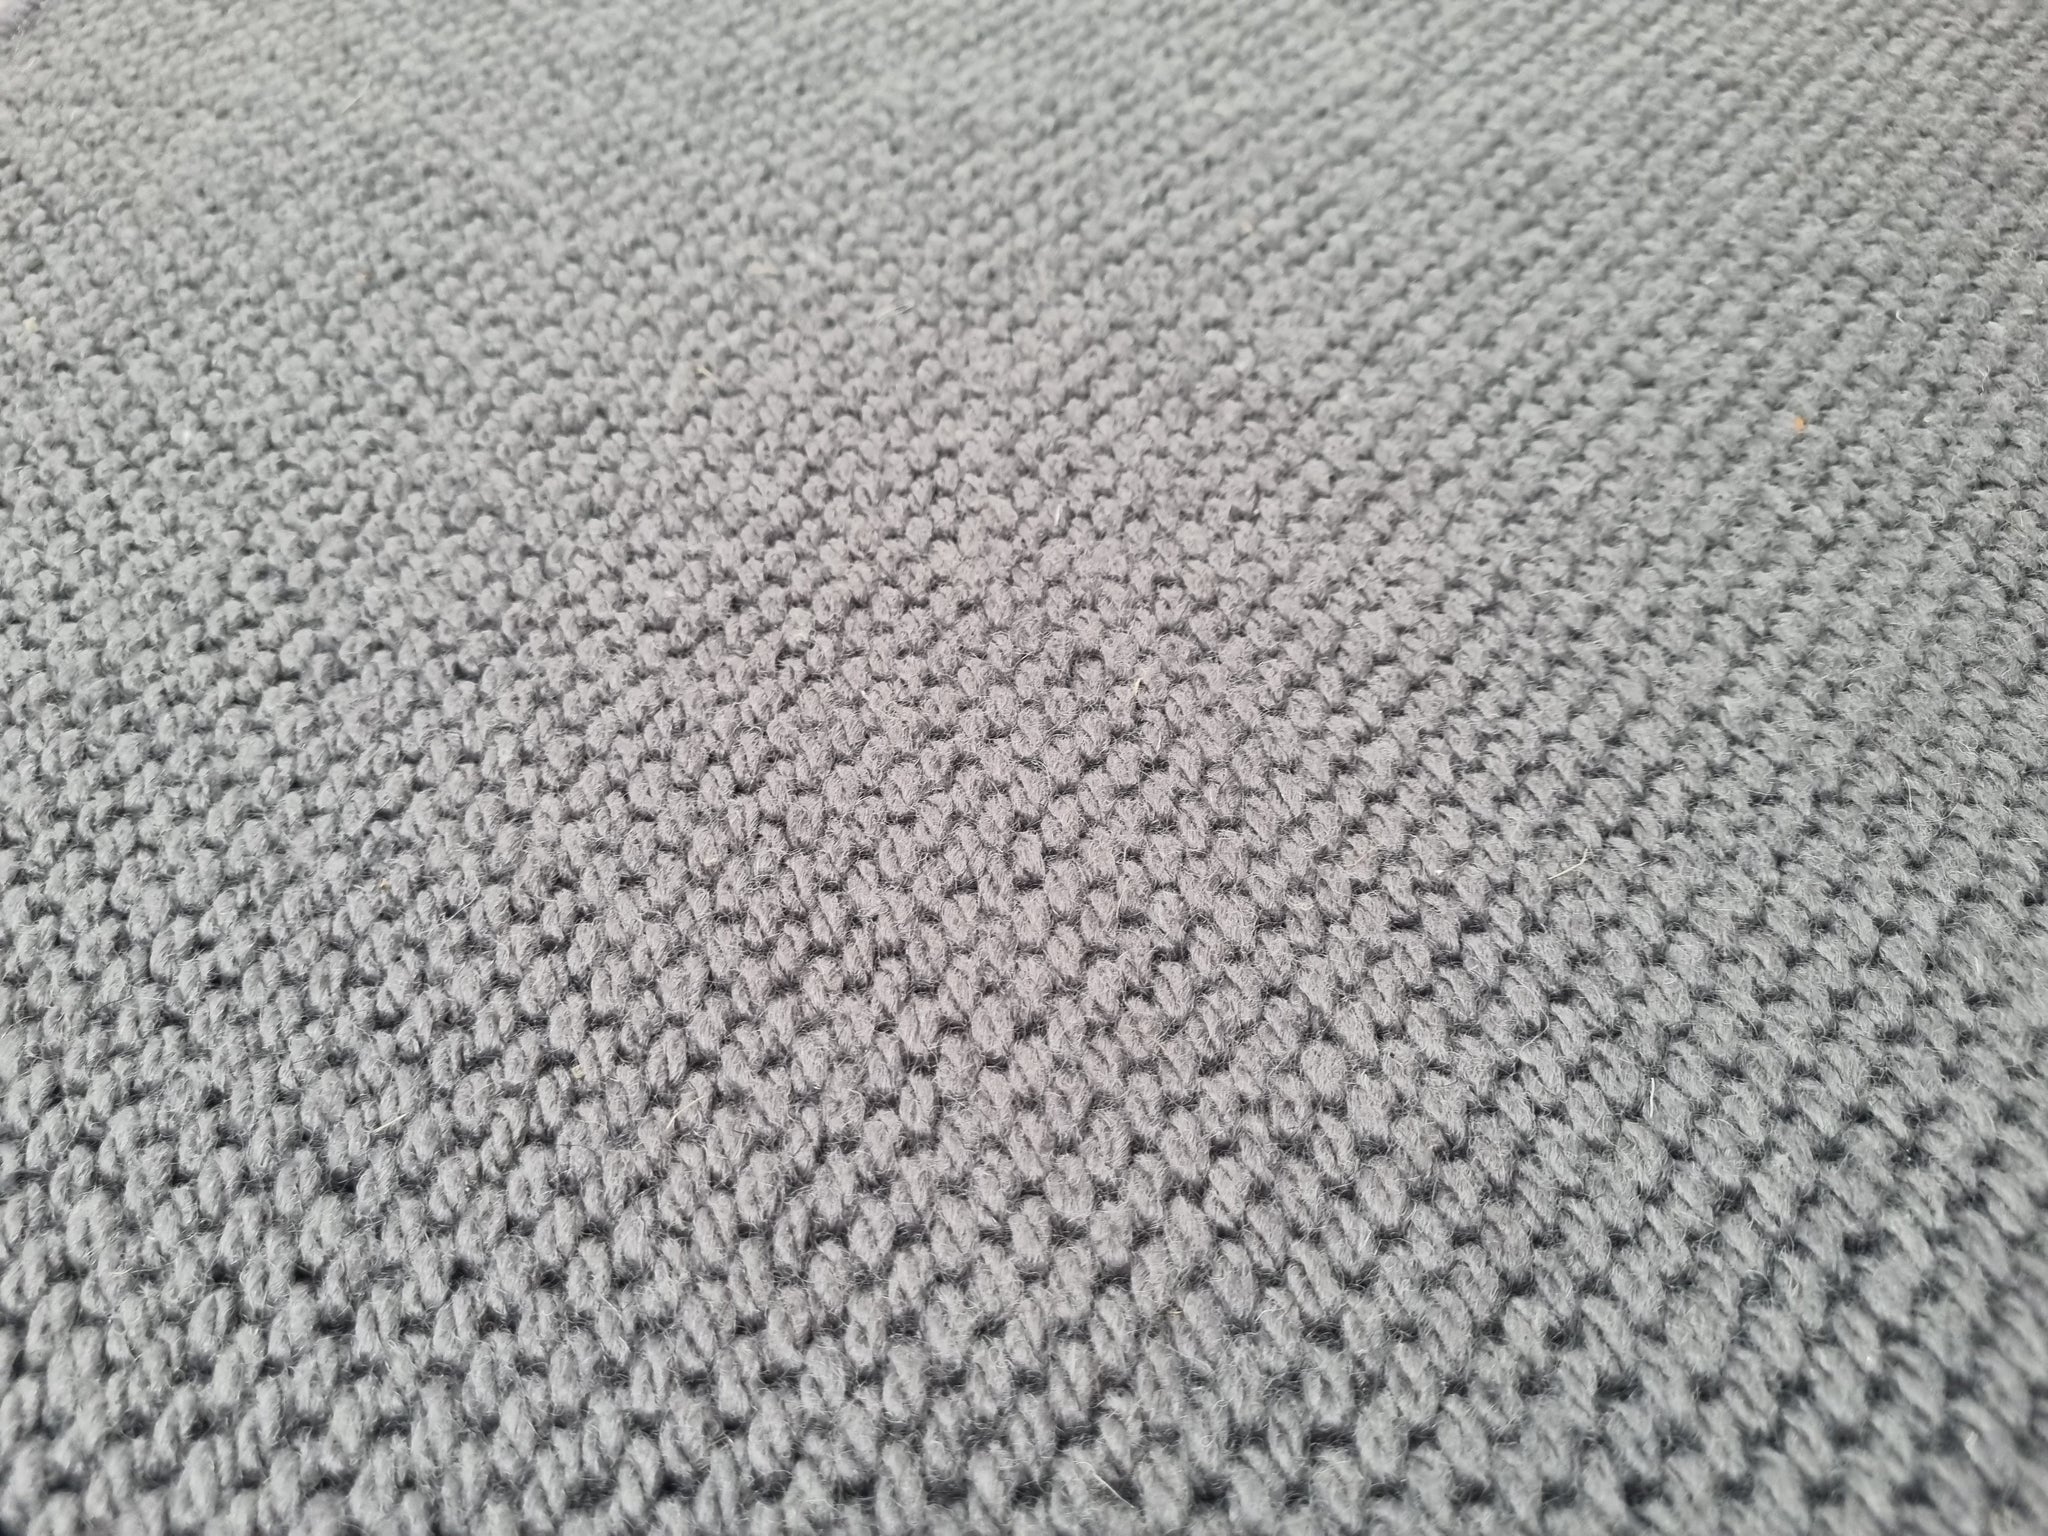 100% wool texture caste iron grey boucle loop stair runner with whipped edge